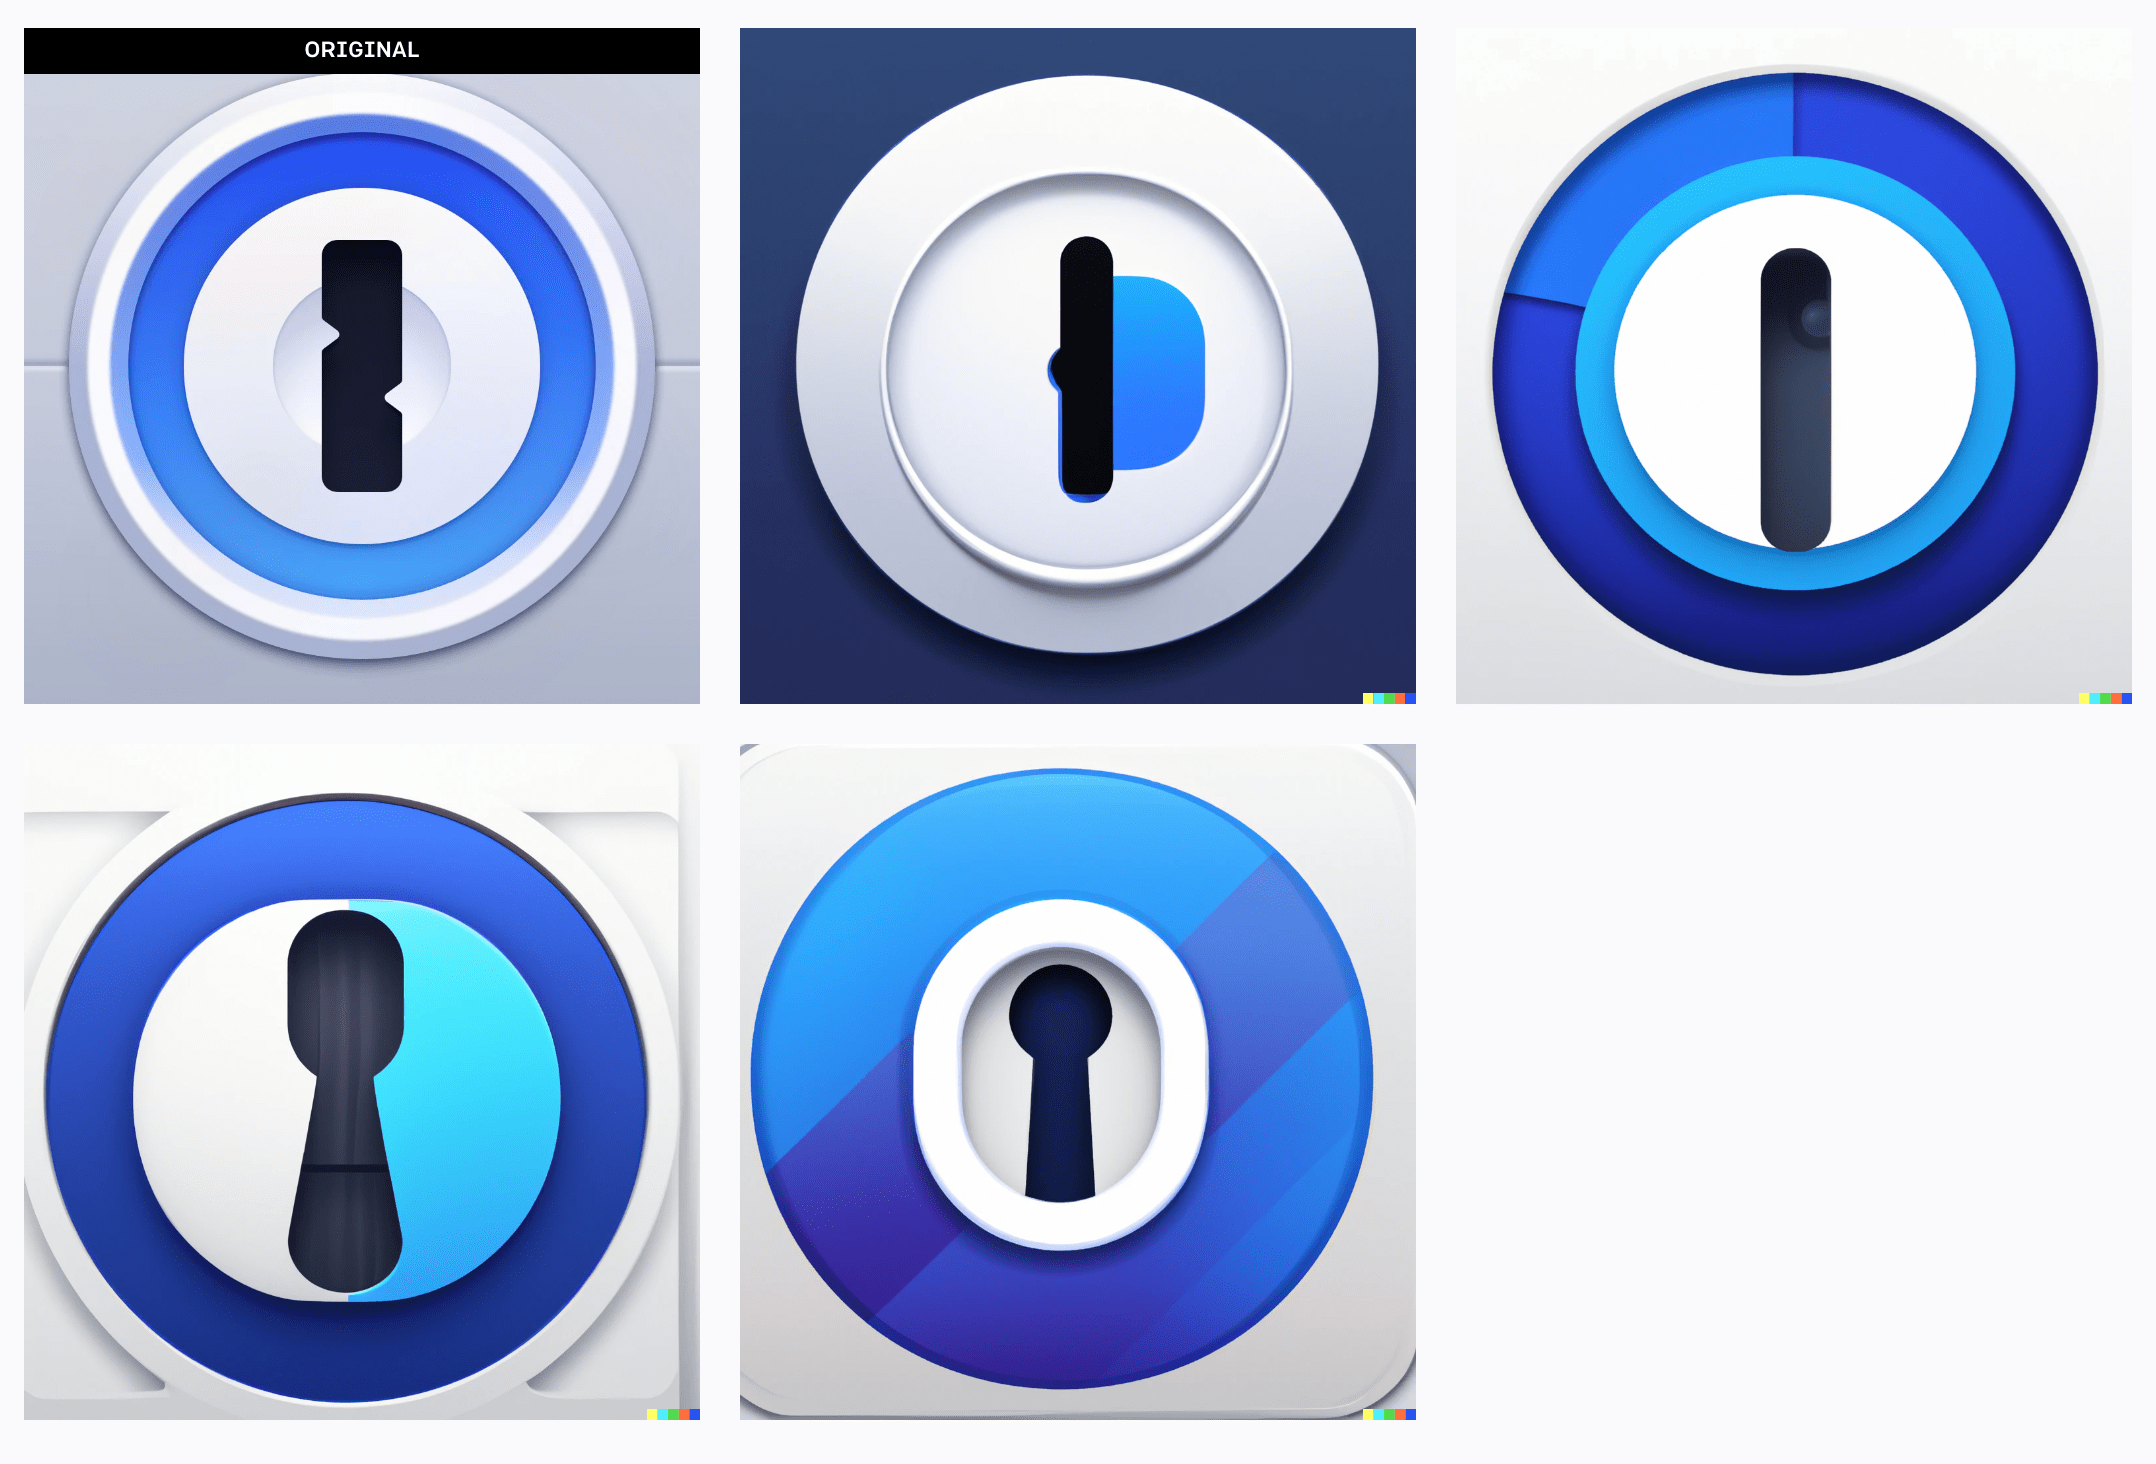 The “1Password” app icon with 4 AI-generated variations alongside it.